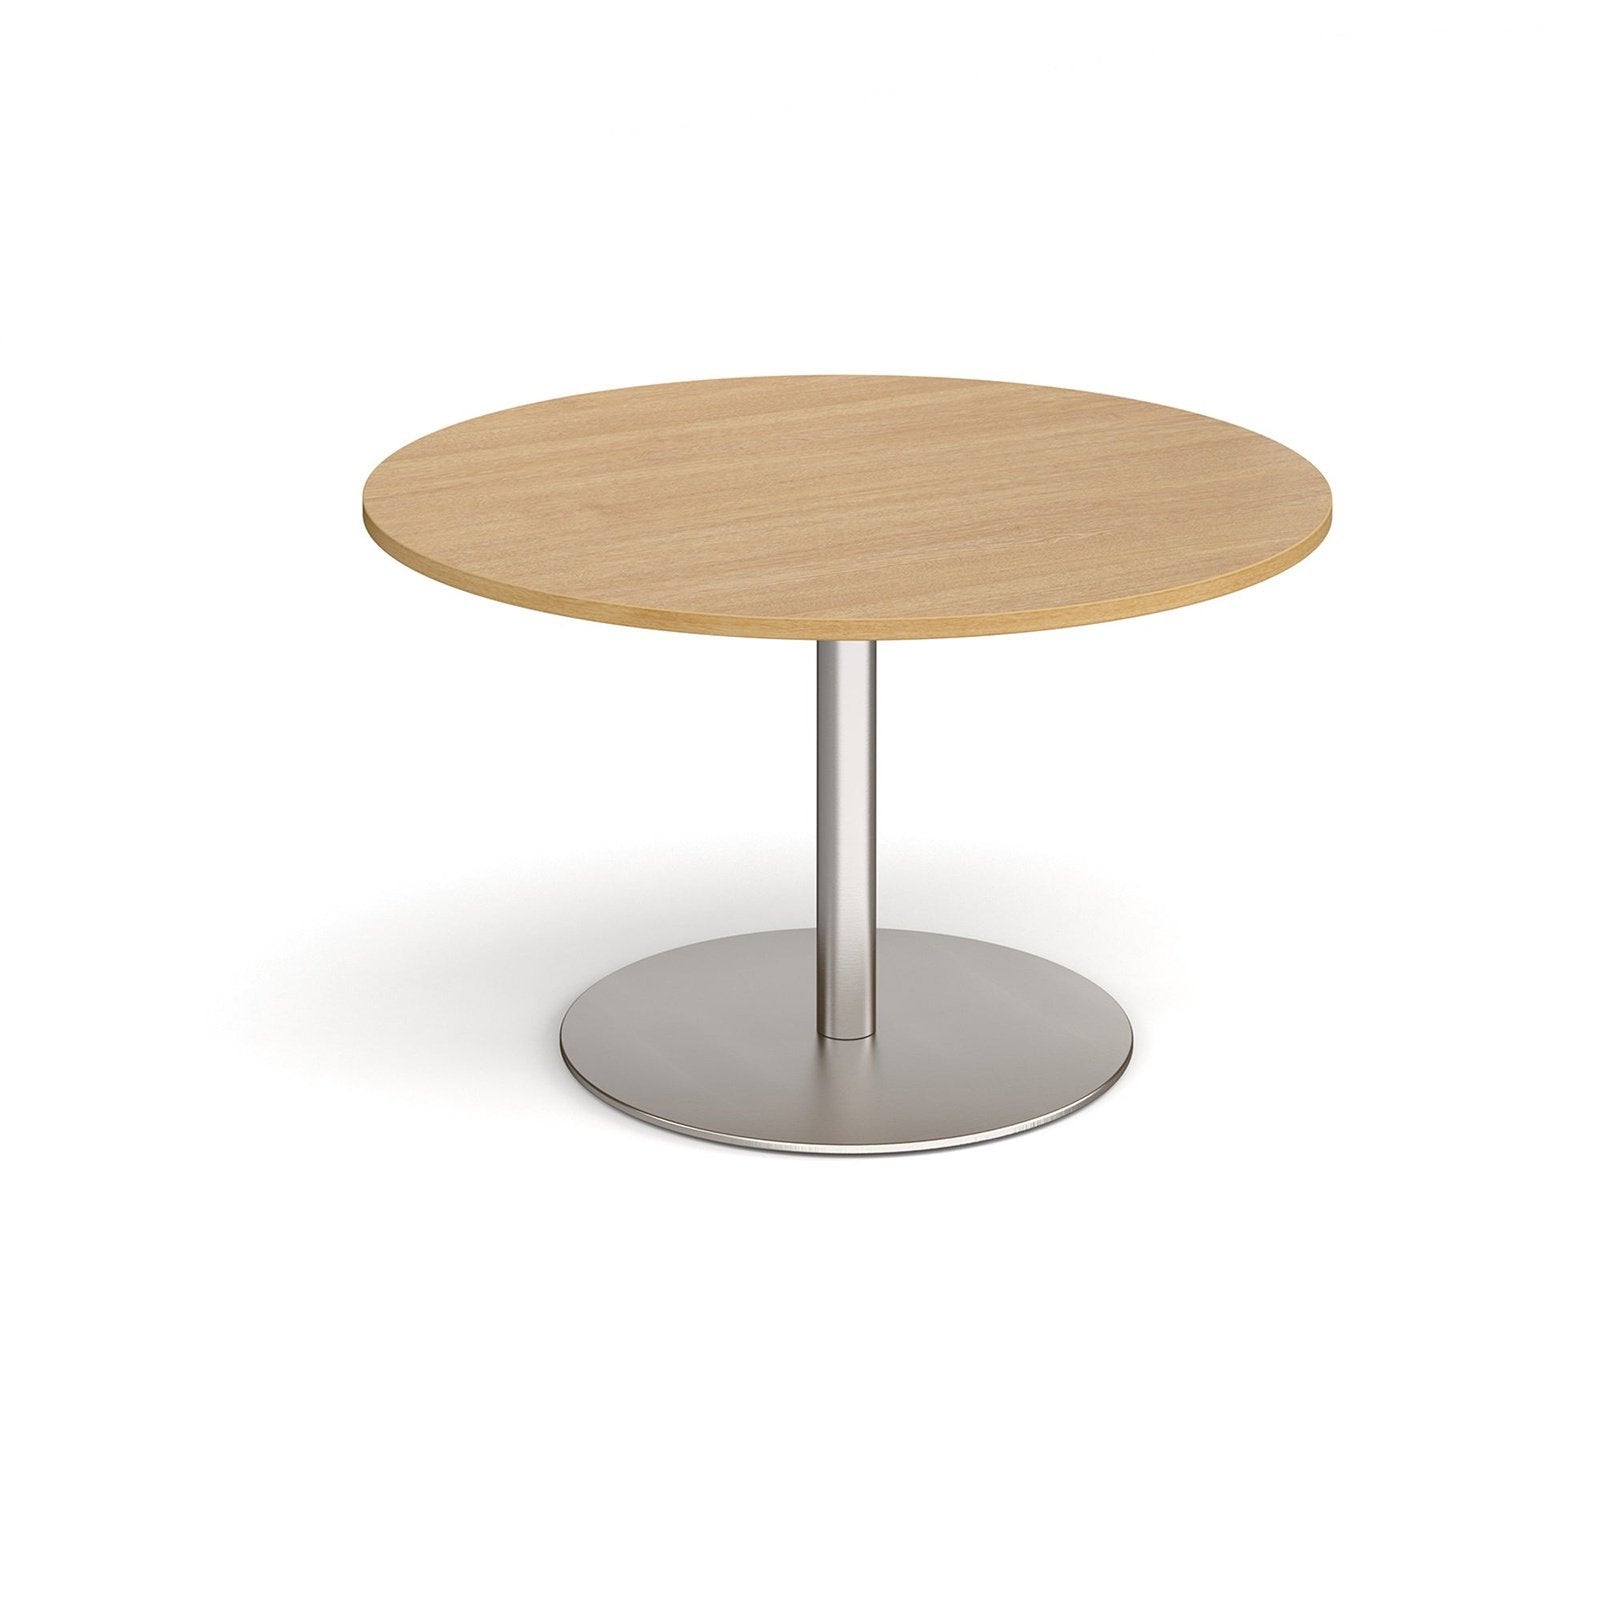 Eternal circular boardroom - Office Products Online